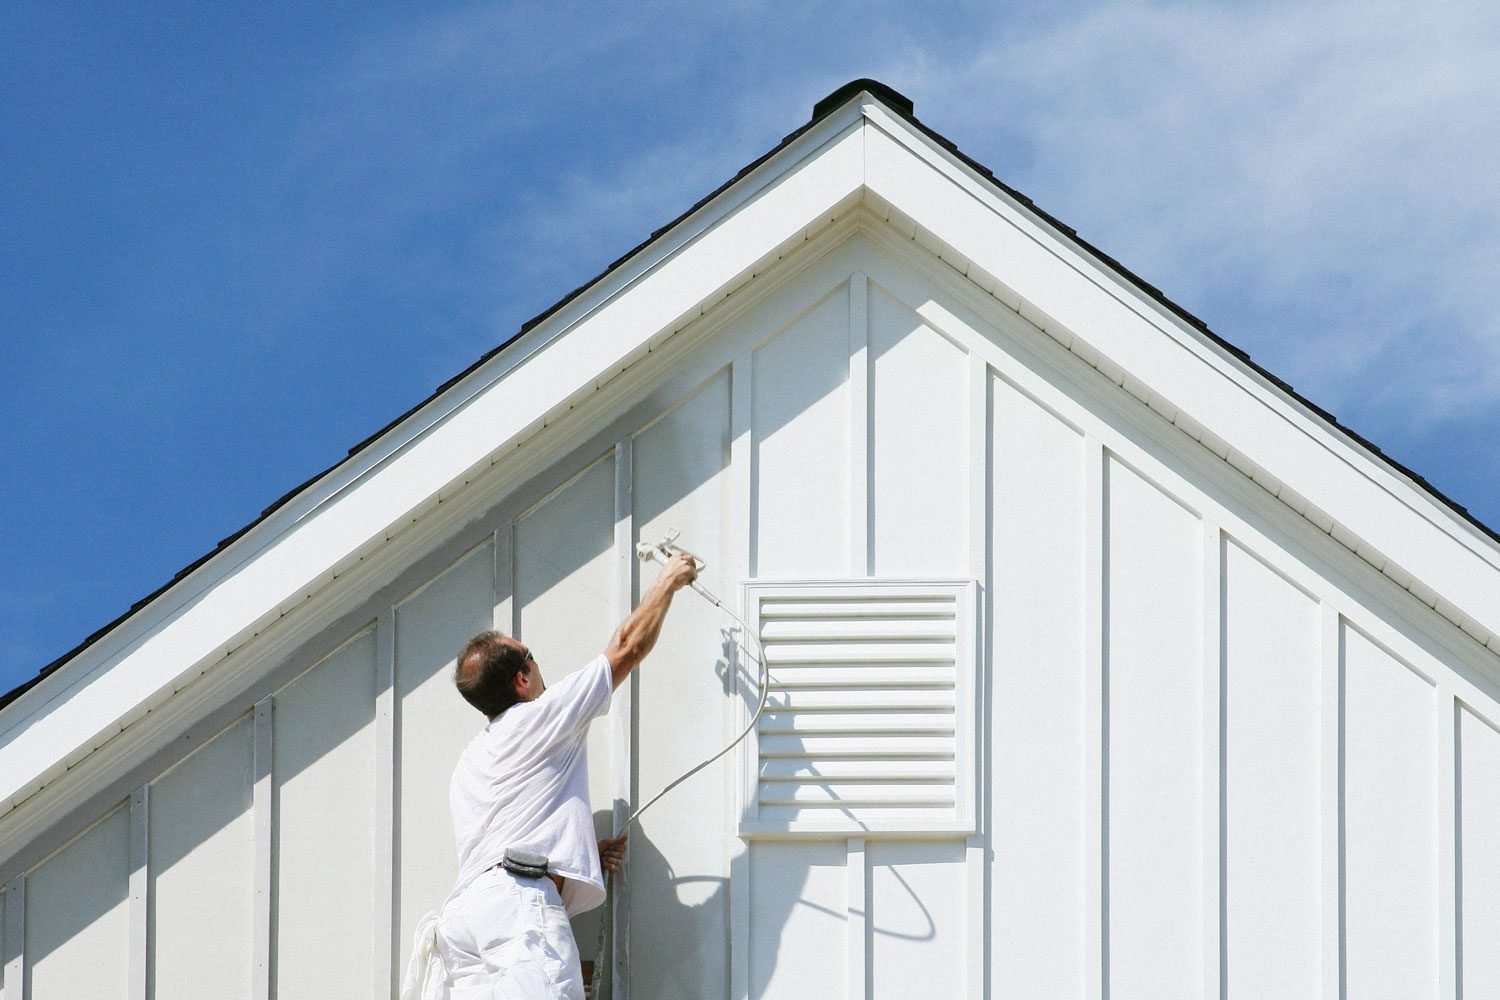 House Painter On Ladder Painting Home Exterior with a Paint Sprayer Gun and White Paint against a Blue Sky